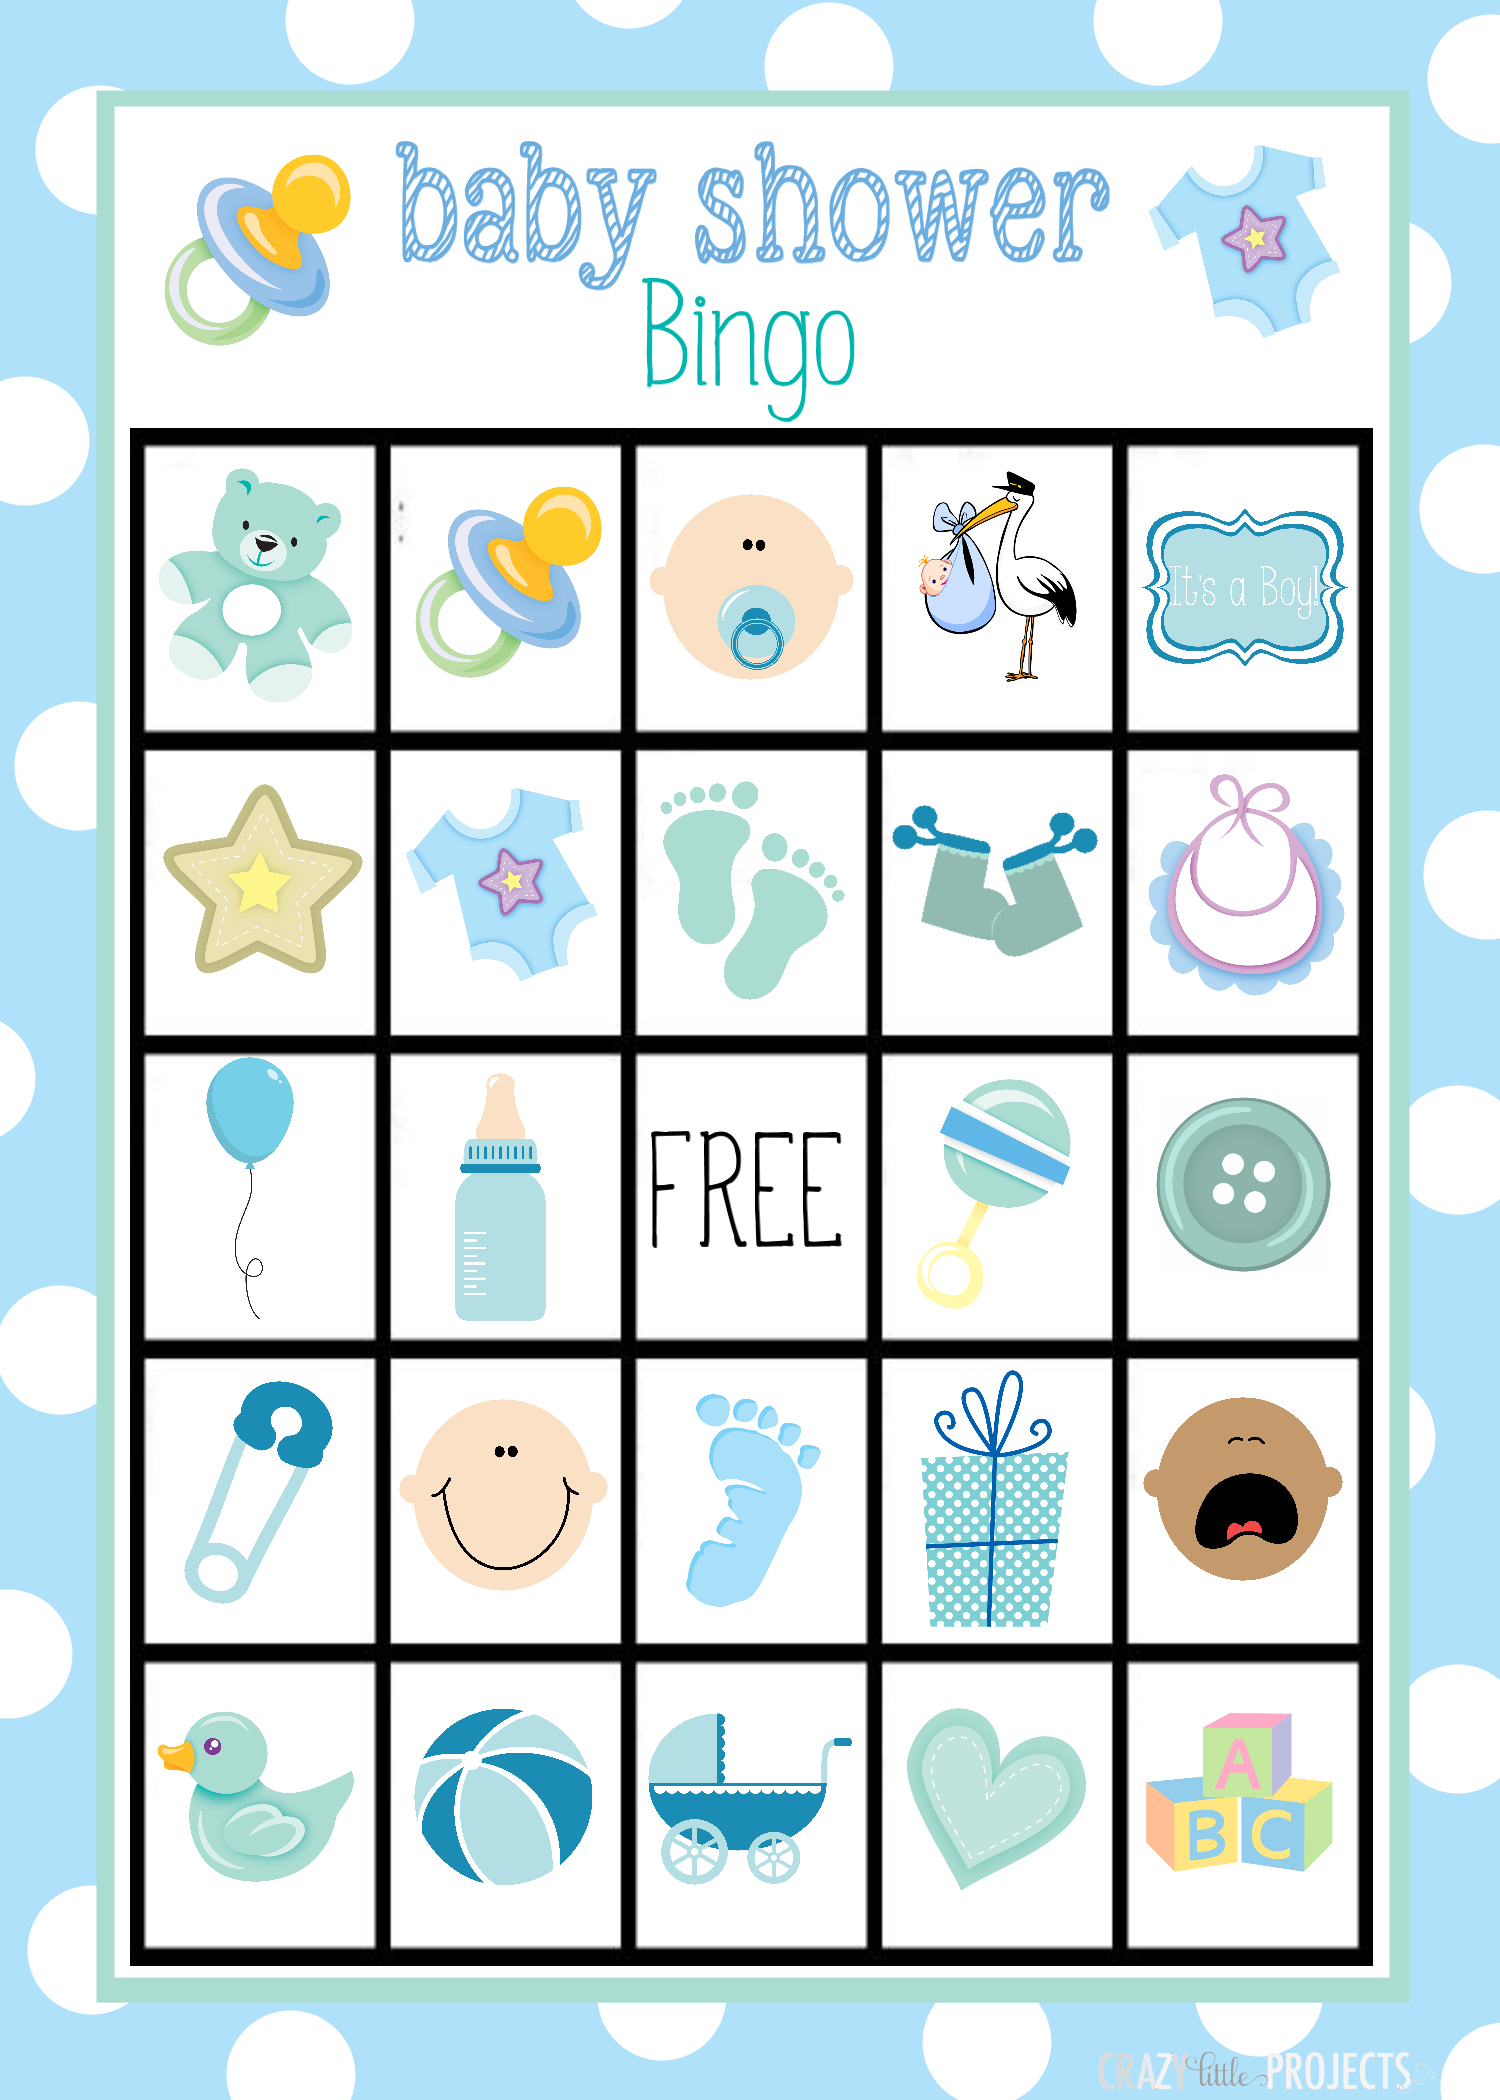 Baby Shower Bingo Cards | Share Your Craft | Baby Shower Bingo, Baby - 50 Free Printable Baby Bingo Cards